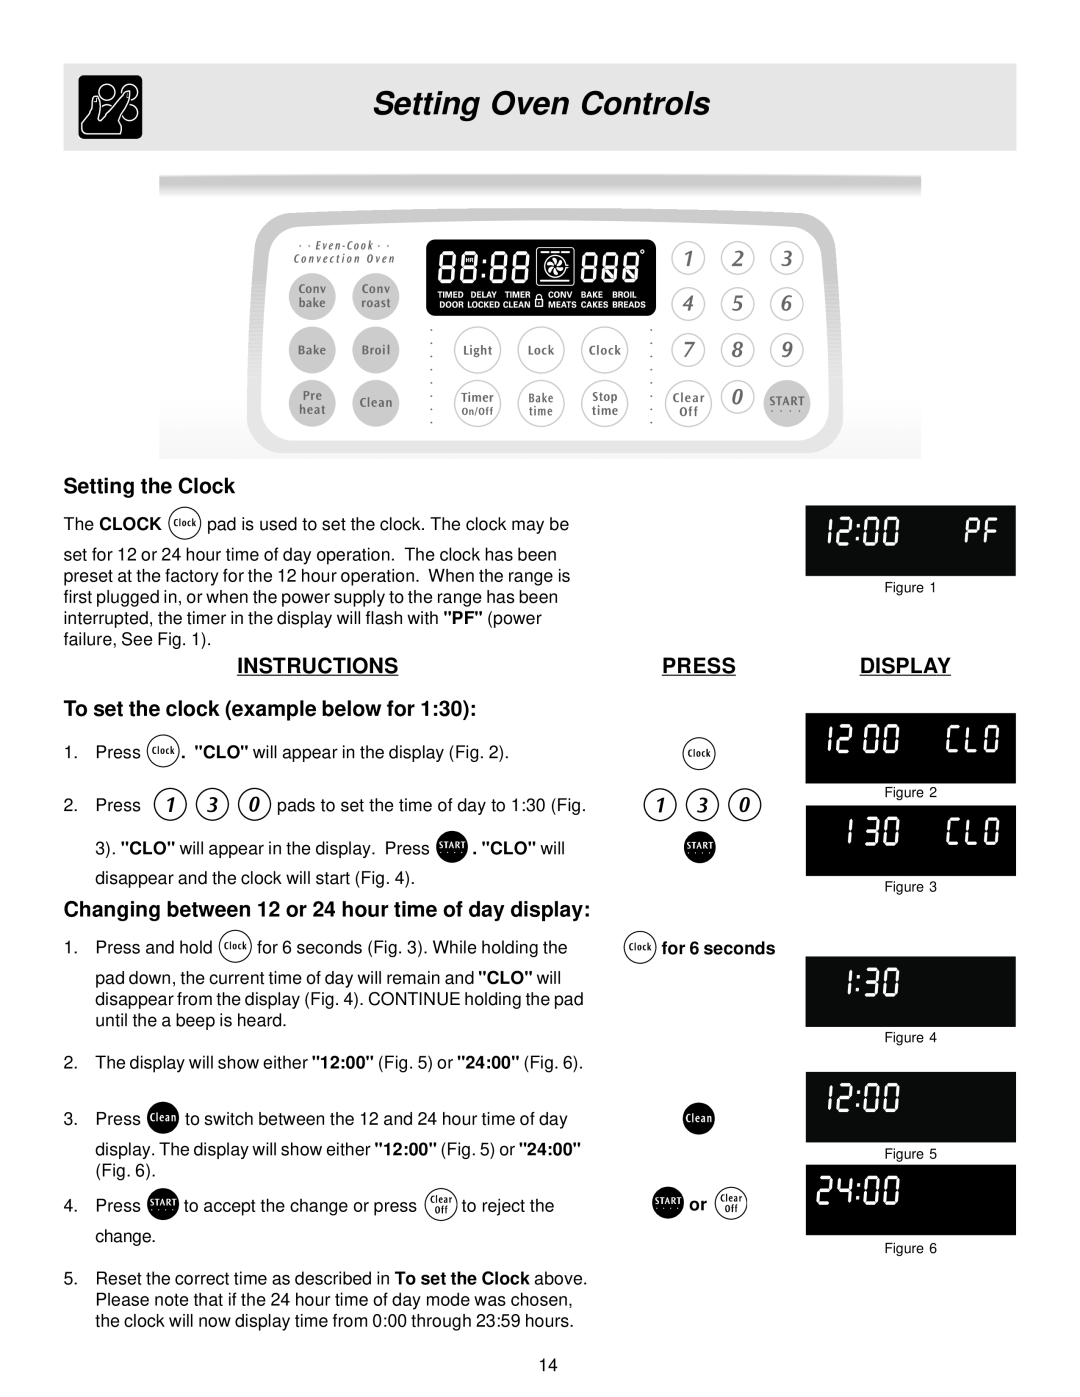 Frigidaire ES400 Setting Oven Controls, Setting the Clock, INSTRUCTIONS To set the clock example below for, Press, Display 